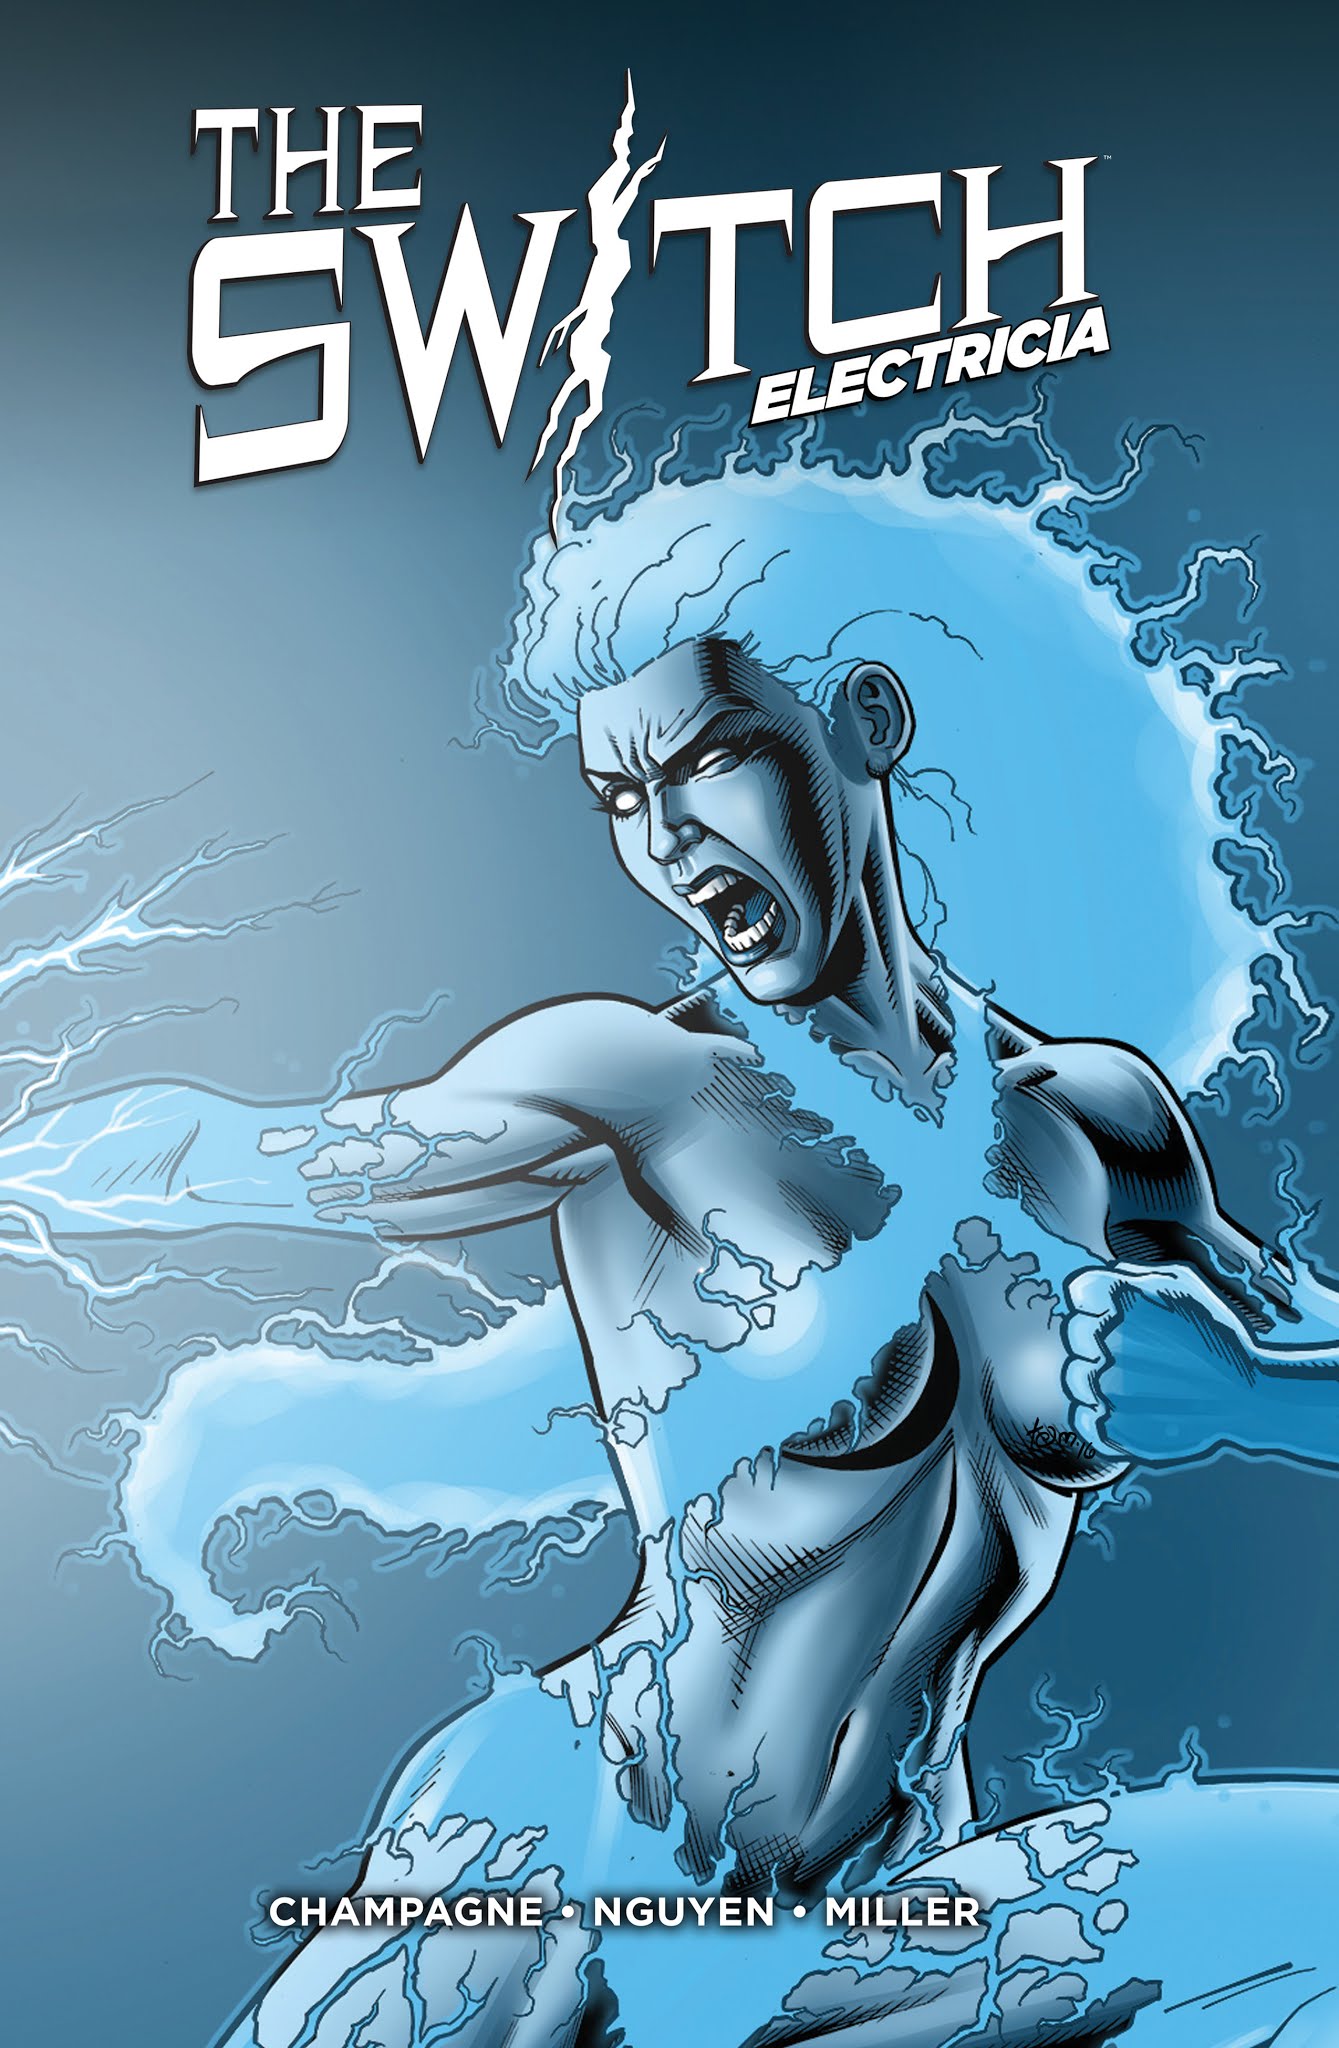 Read online The Switch: Electricia comic -  Issue # TPB - 1